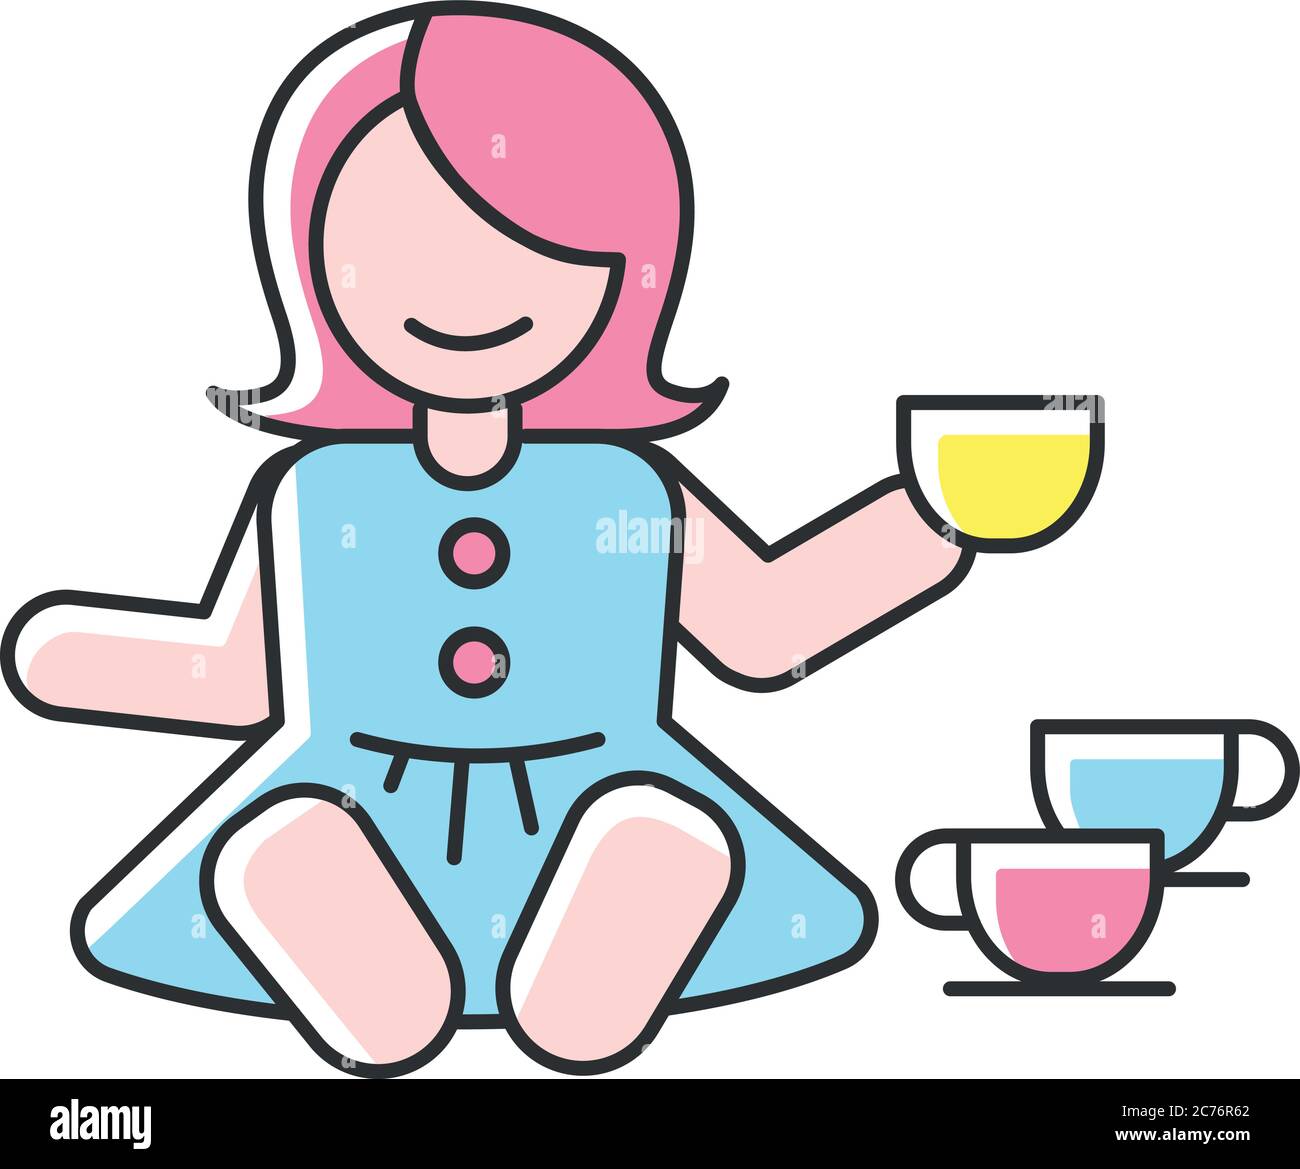 Pretend kitchenware RGB color icon. Baby doll with tea set. Toys for playing pretend game with children. Social skills development. Girls activity ide Stock Vector